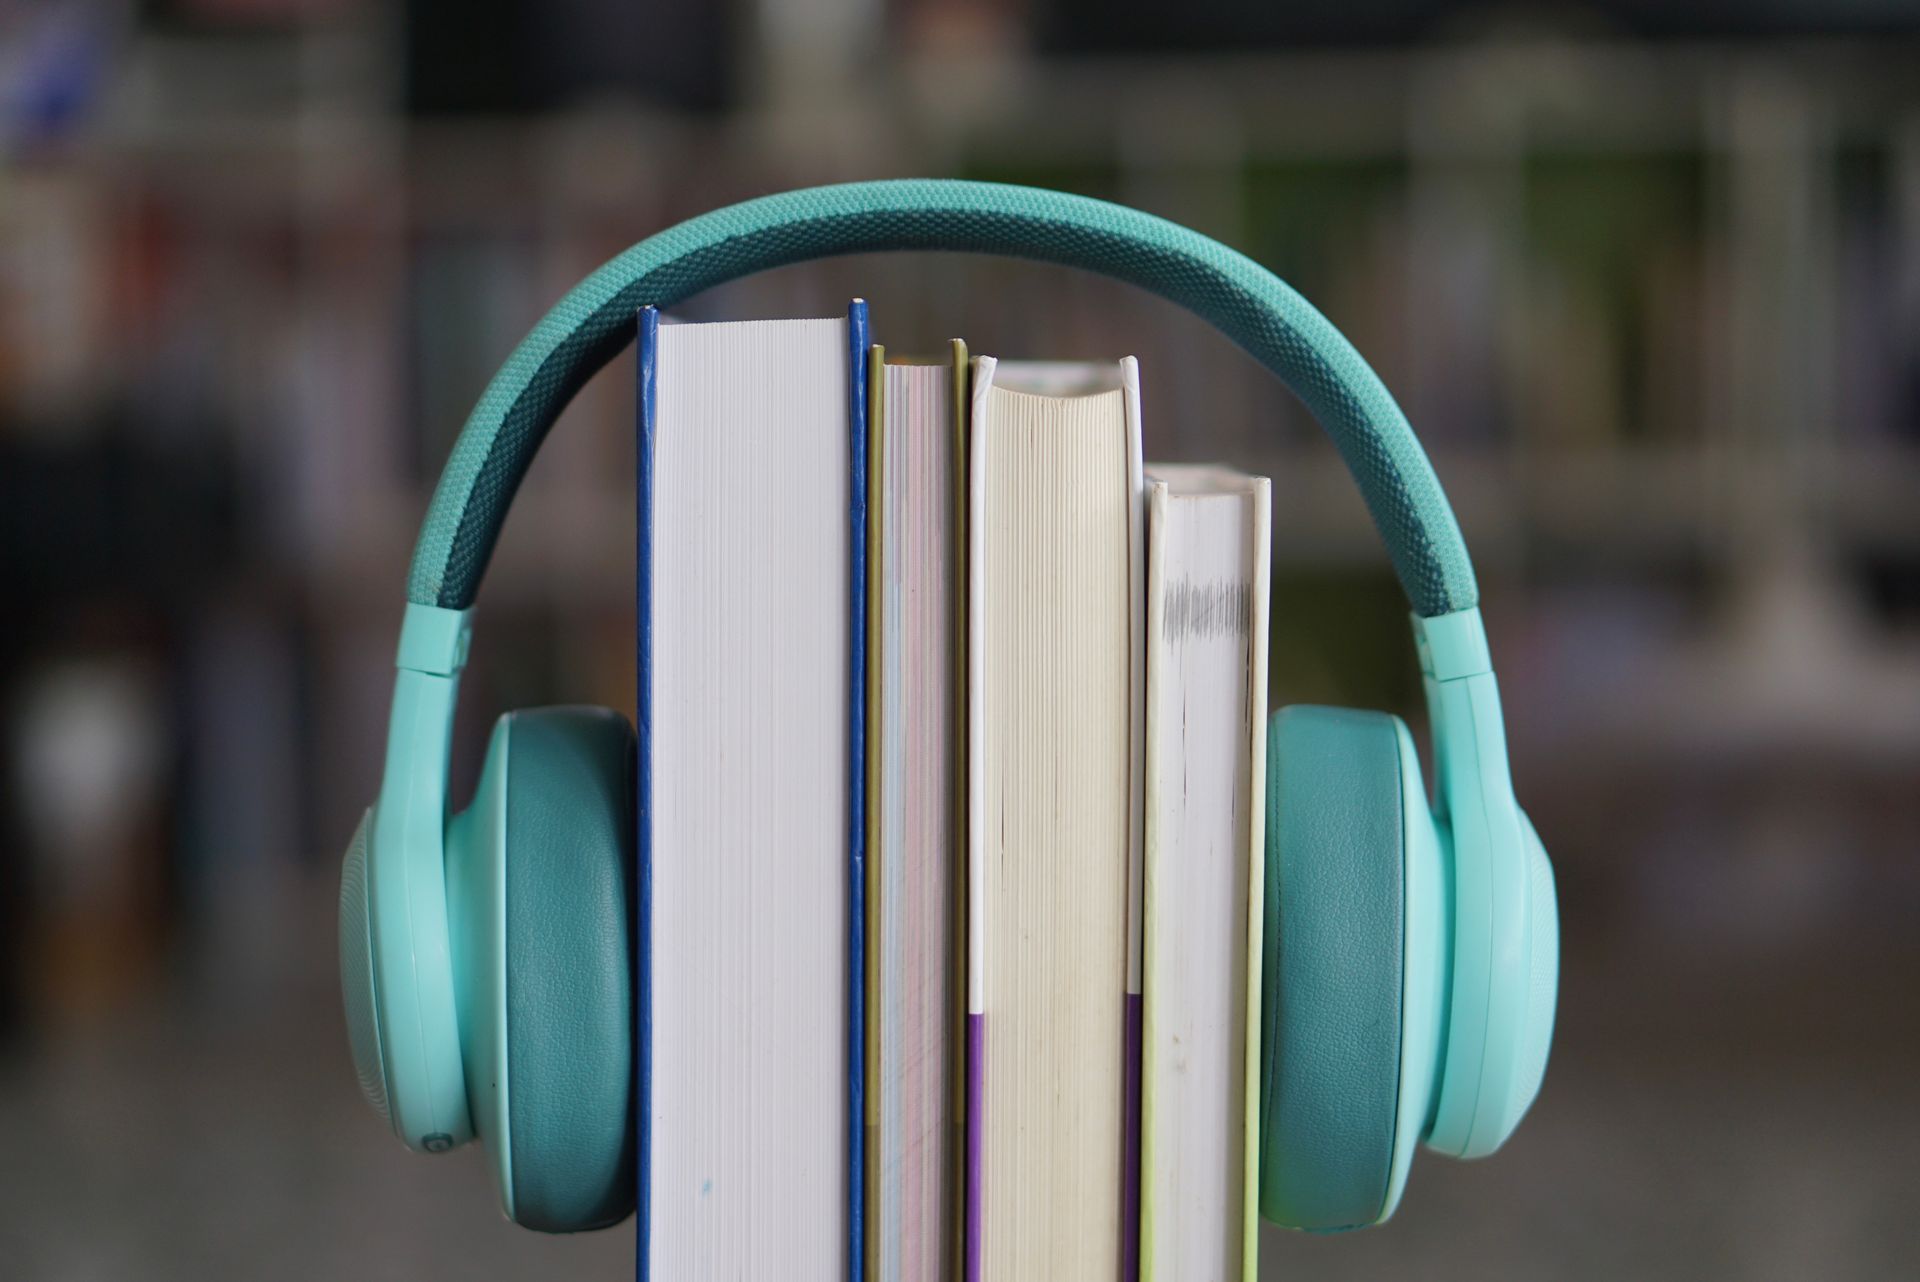 A set of headphones rest over a collection of books to symbolise audiobooks.